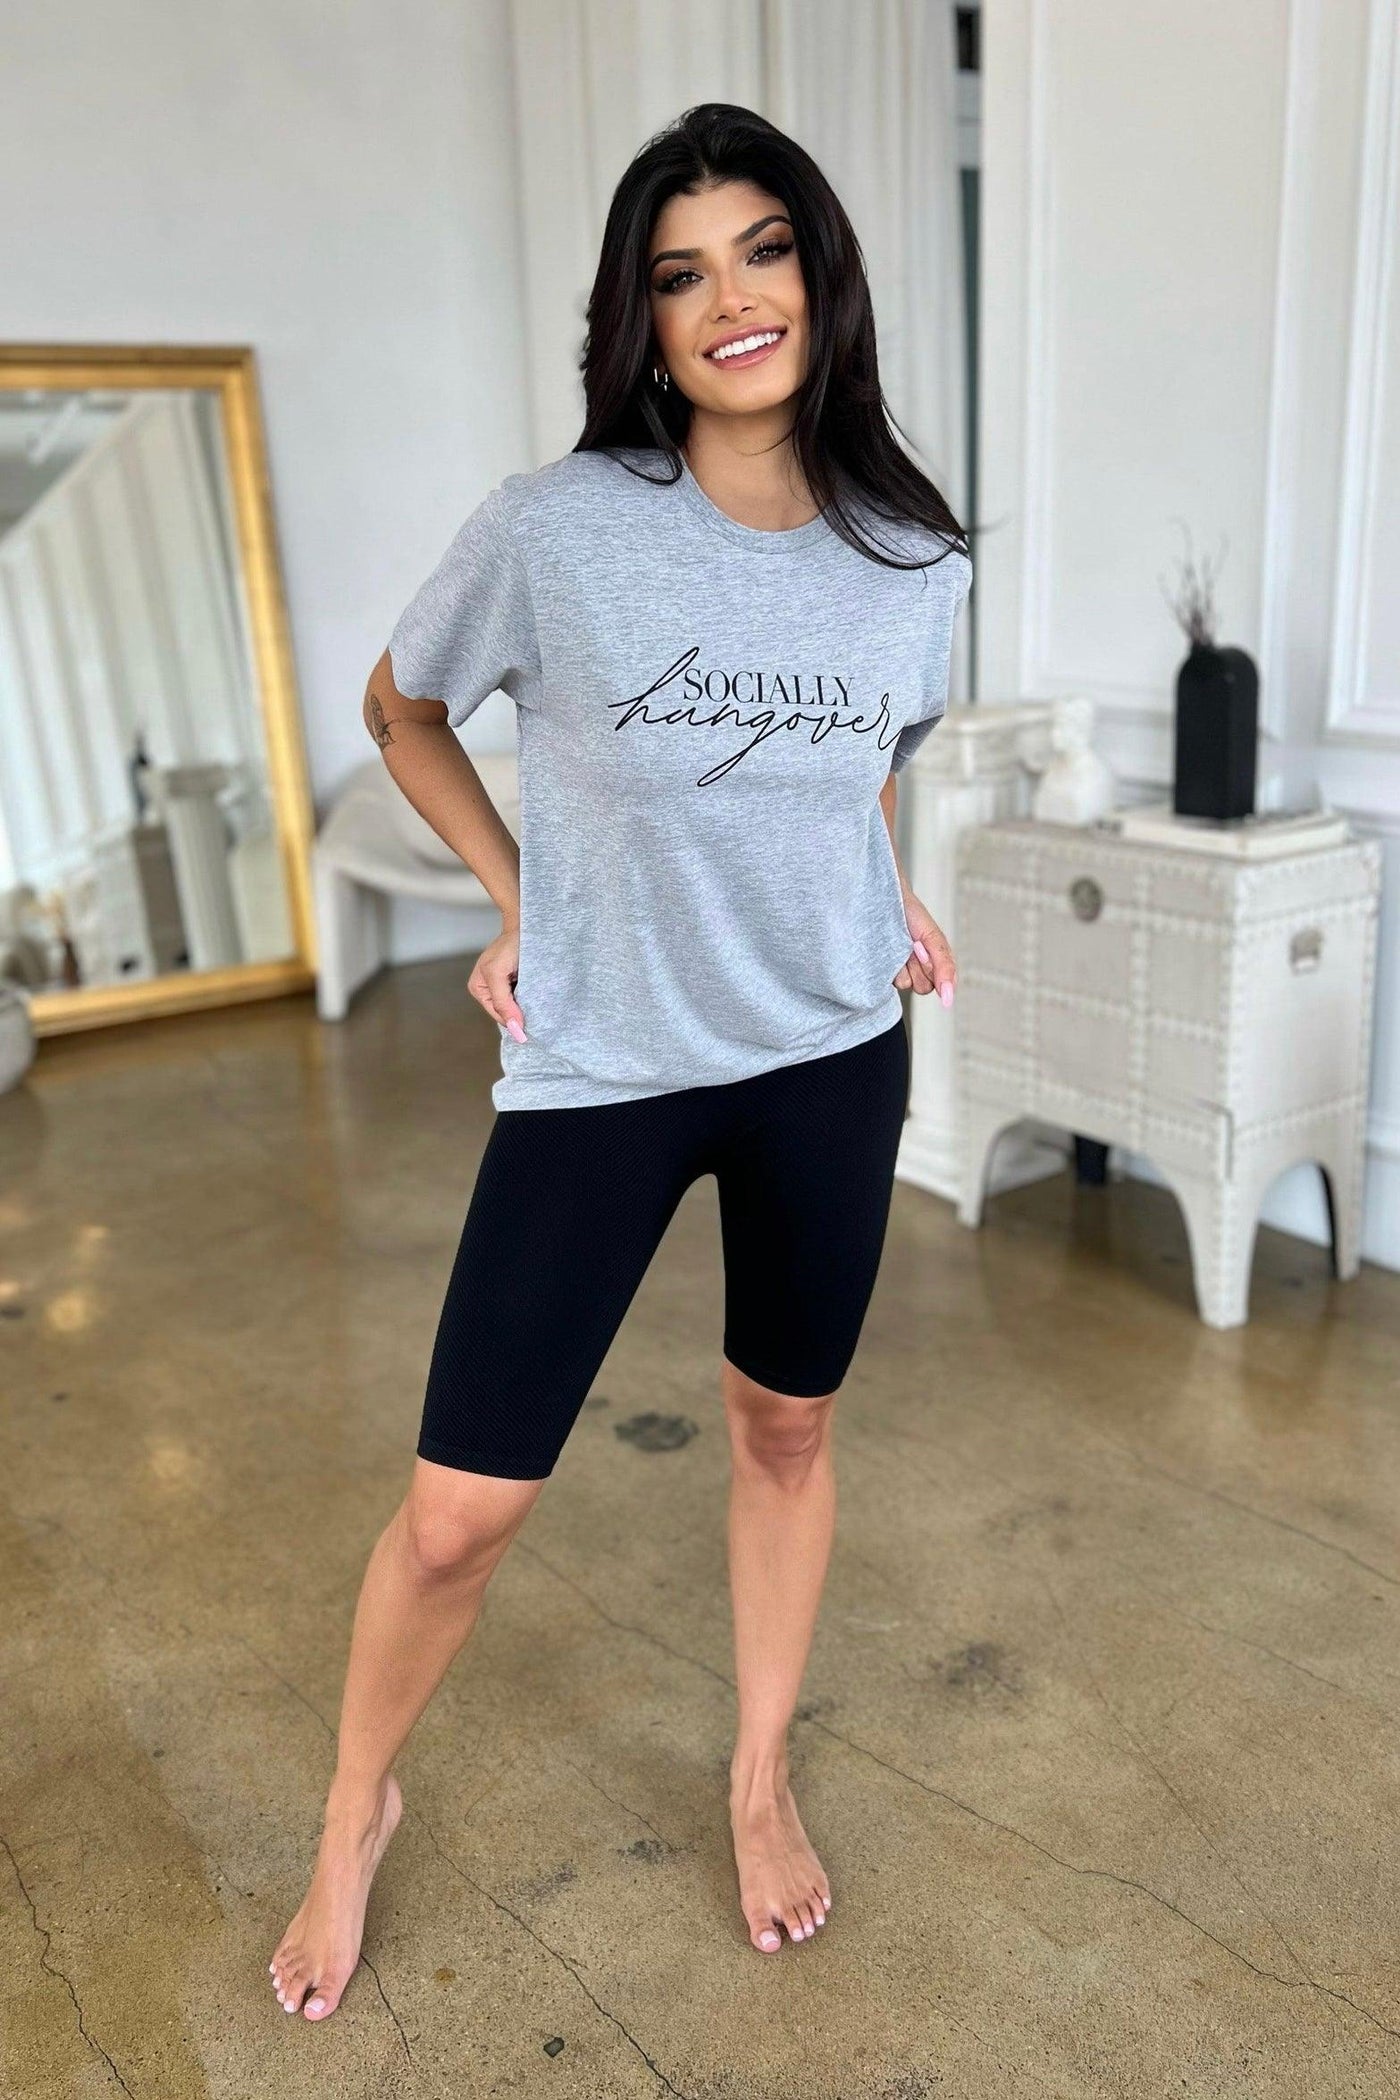 SOCIALLY HUNGOVER T-SHIRT (PLUS AVAILABLE) , SWEATER , it’sNOMB , GRAPHIC, GRAY, GREY, HEATHER GREY, HUNGOVER, it's nomb the label, ITS NOMB, Its None of My Business, ITSNOMB, ITSNOMBTHELABEL, IT’S NOMB, SOCIAL HANGOVER, socially hungover, SOCIALLY HUNGOVER T-SHIRT , It's NOMB , itsnomb.com